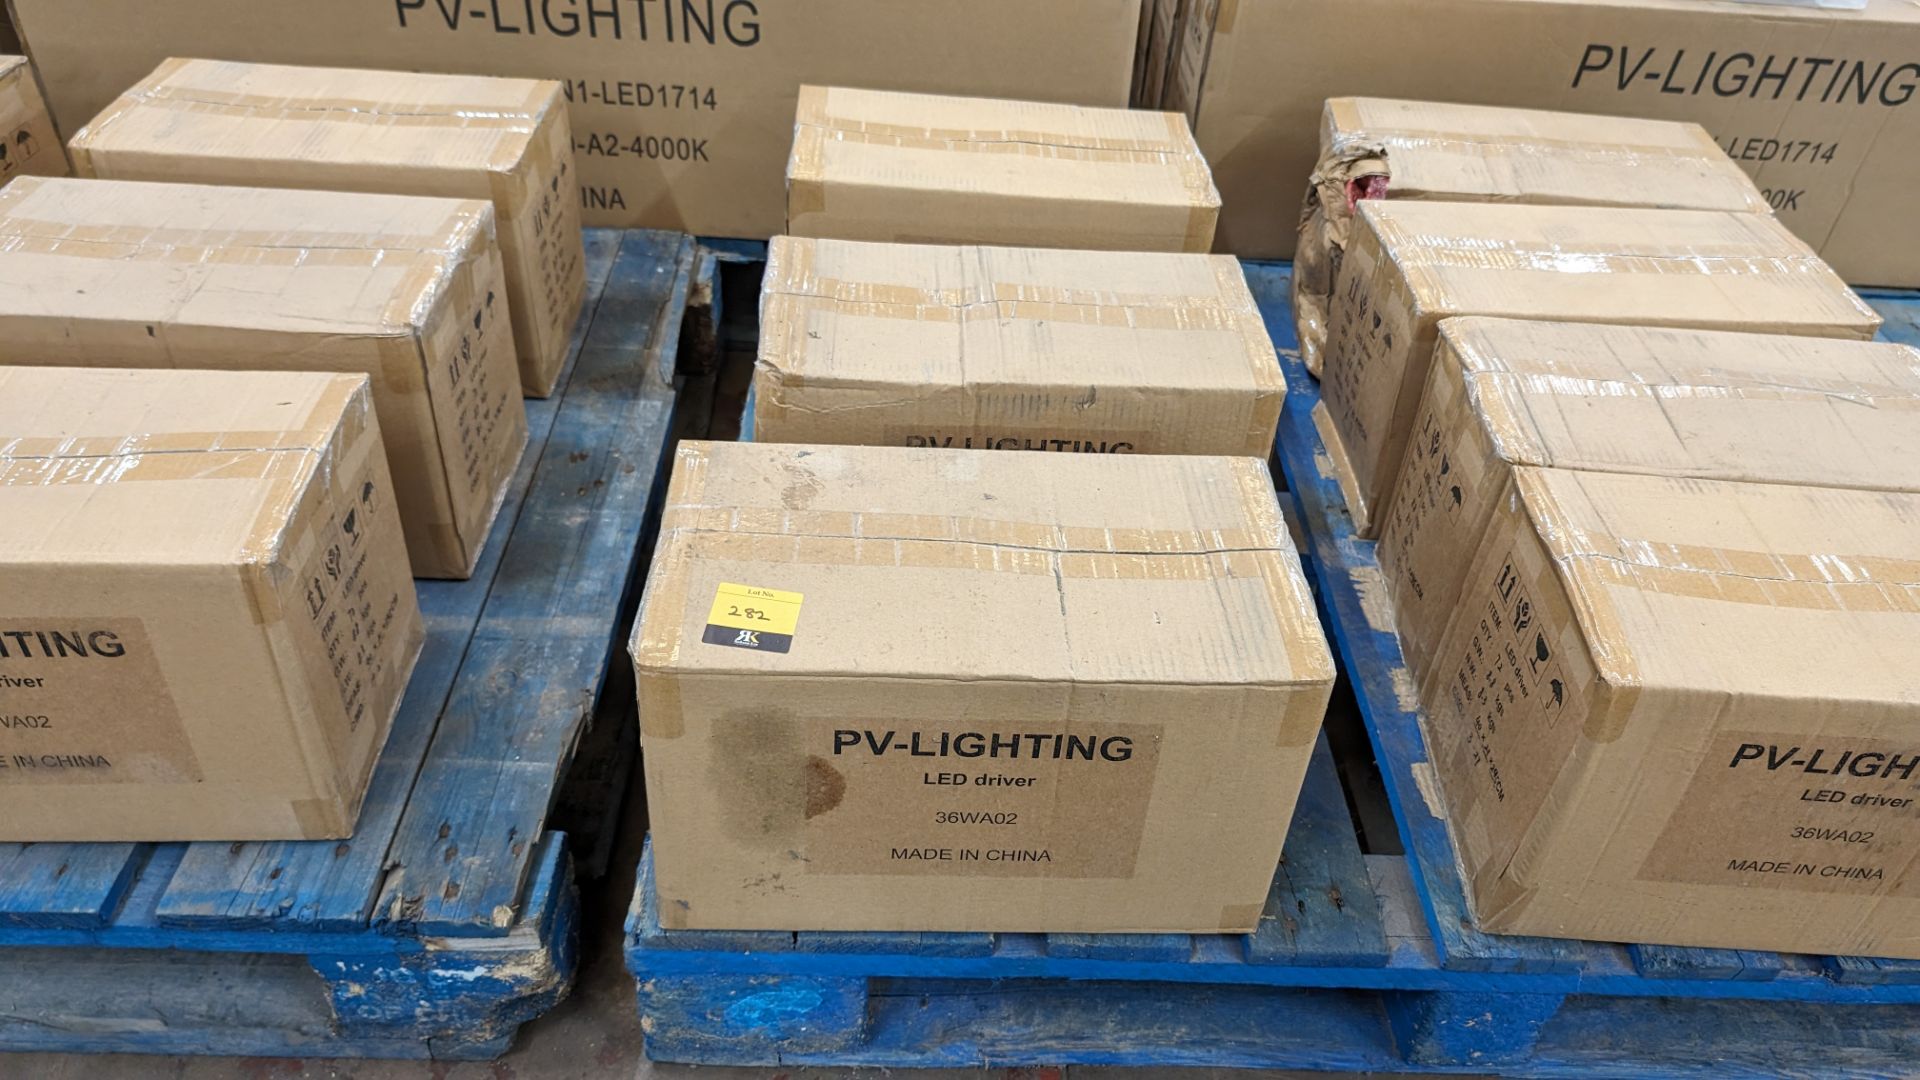 Approximately 216 off LED drivers, model IN-36WA02, 36VDC, 950mA - 3 boxes - Image 2 of 4